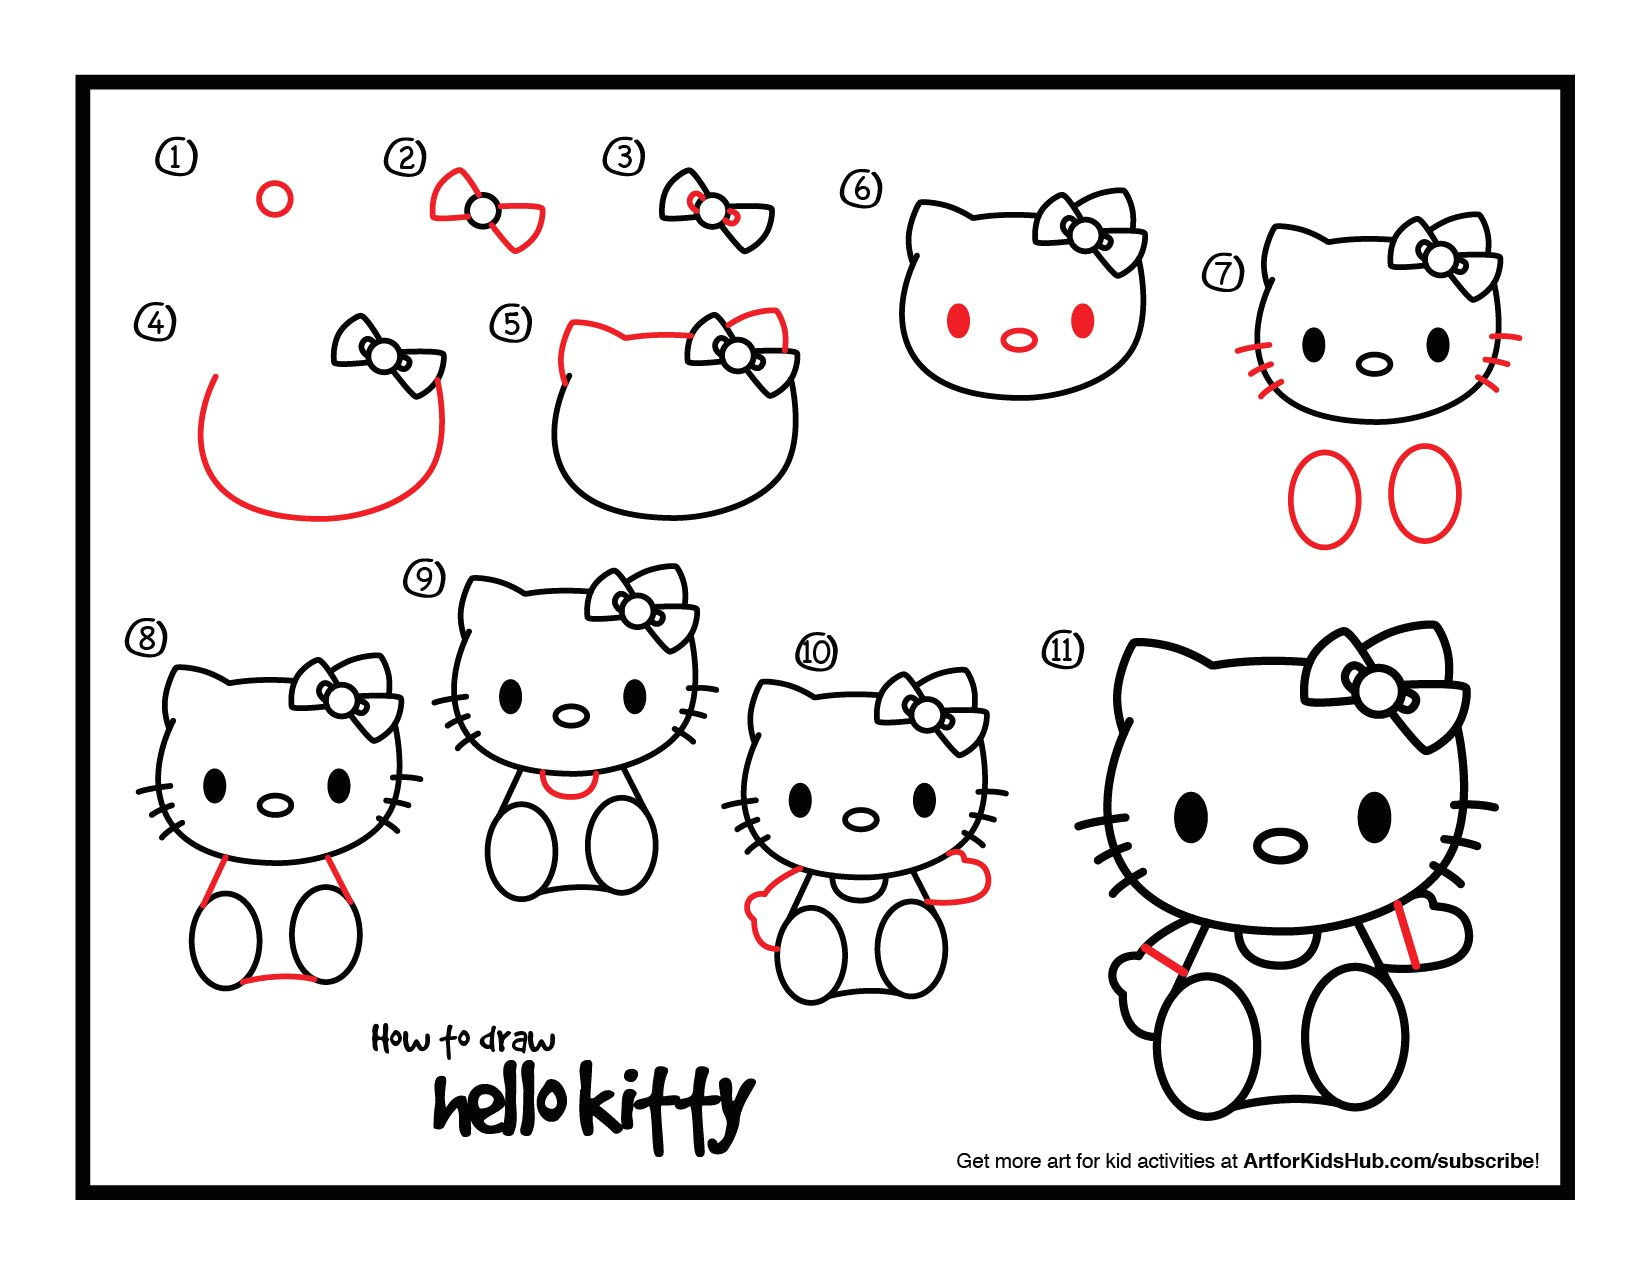 Easy Drawings Hello Kitty How to Draw Hello Kitty Easy Drawing Pinterest Drawings Hello